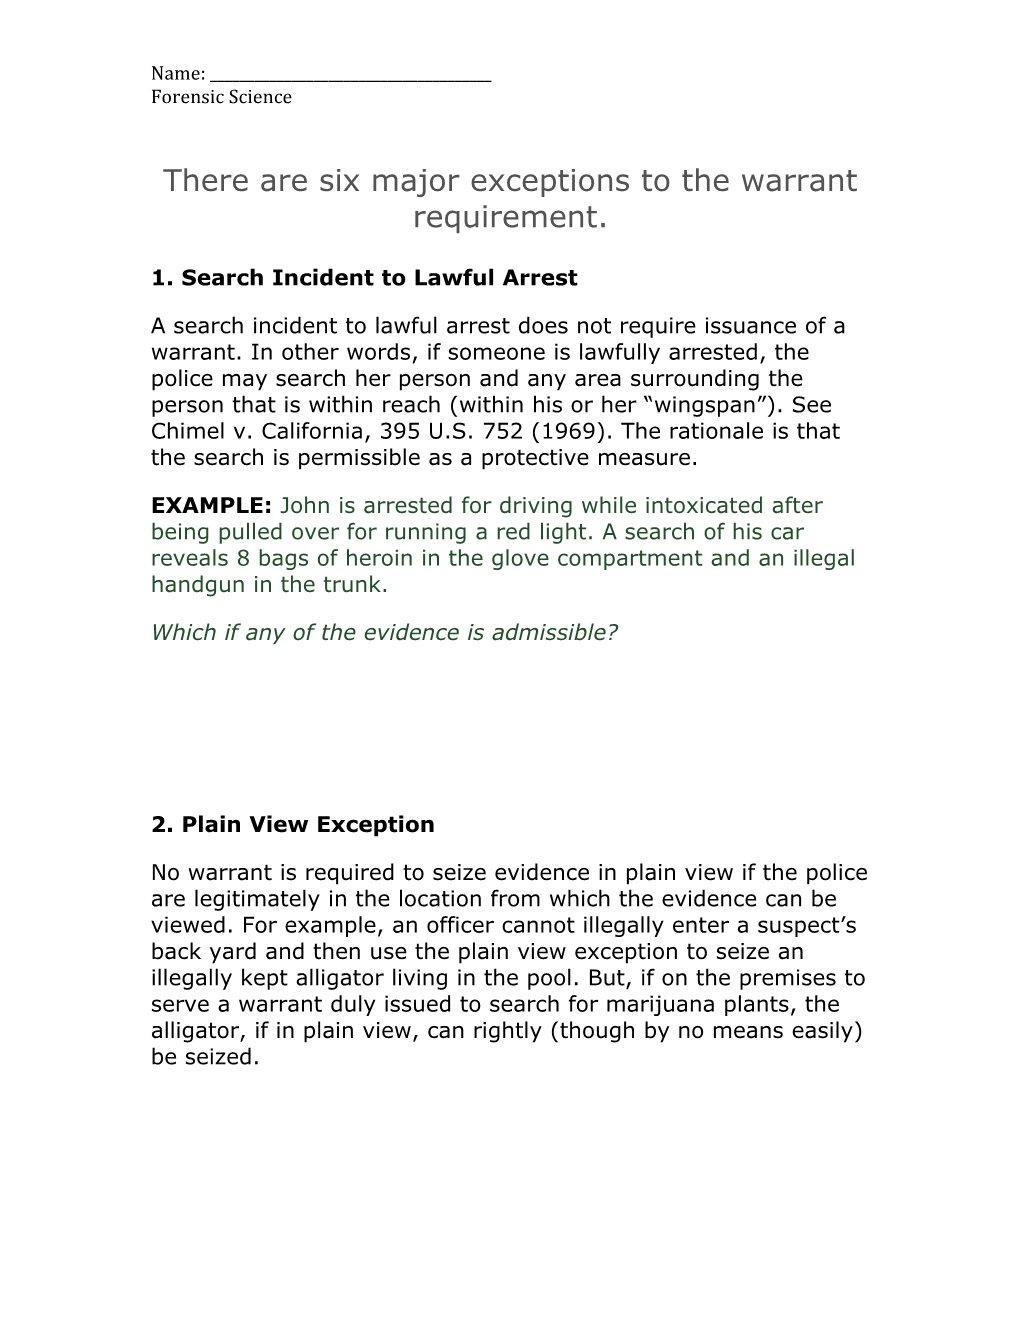 There Are Six Major Exceptions to the Warrant Requirement